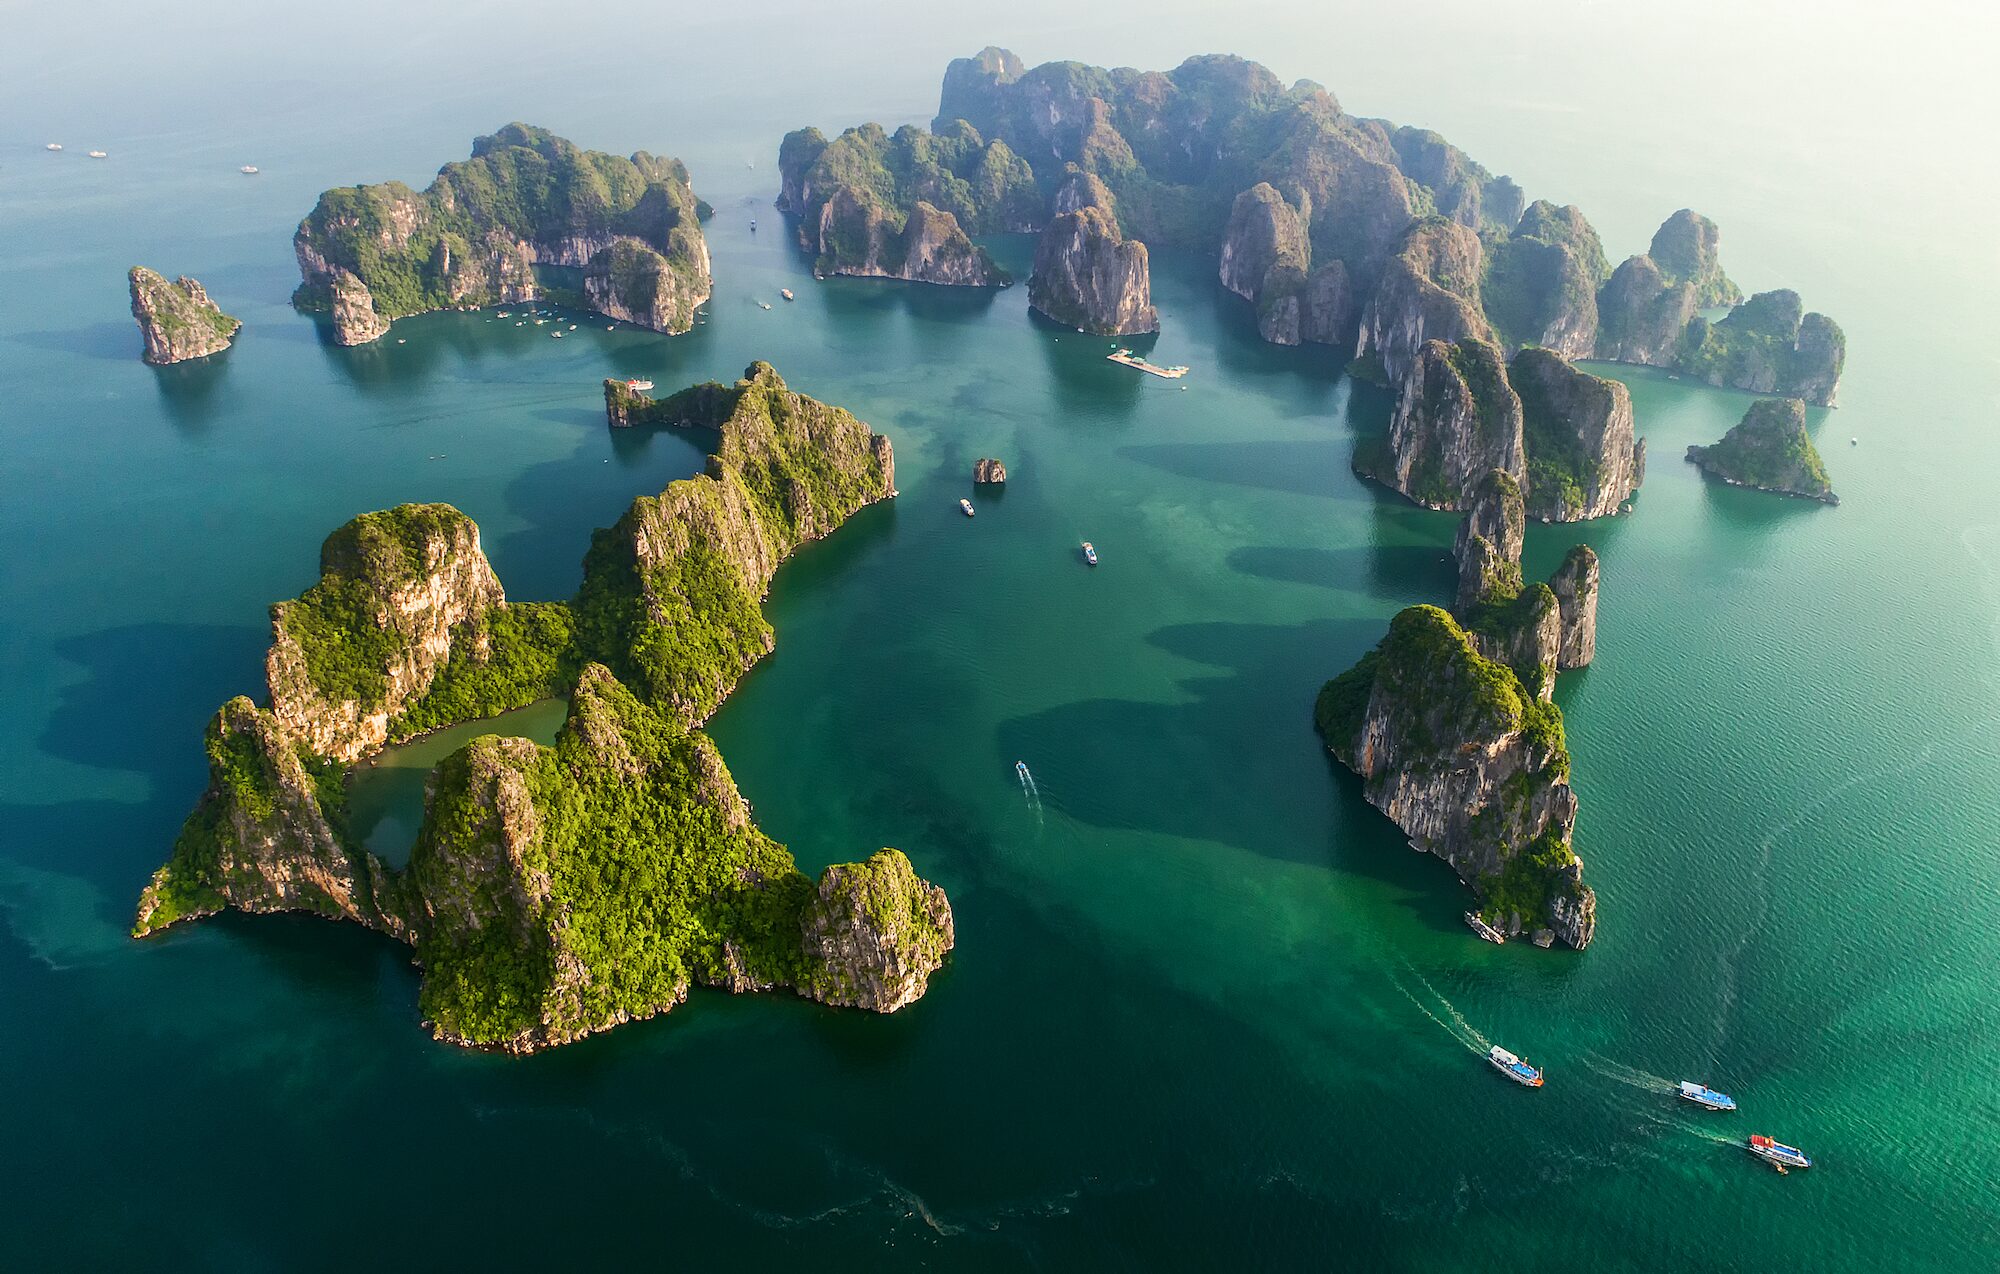 best places to visit southeast asia in may